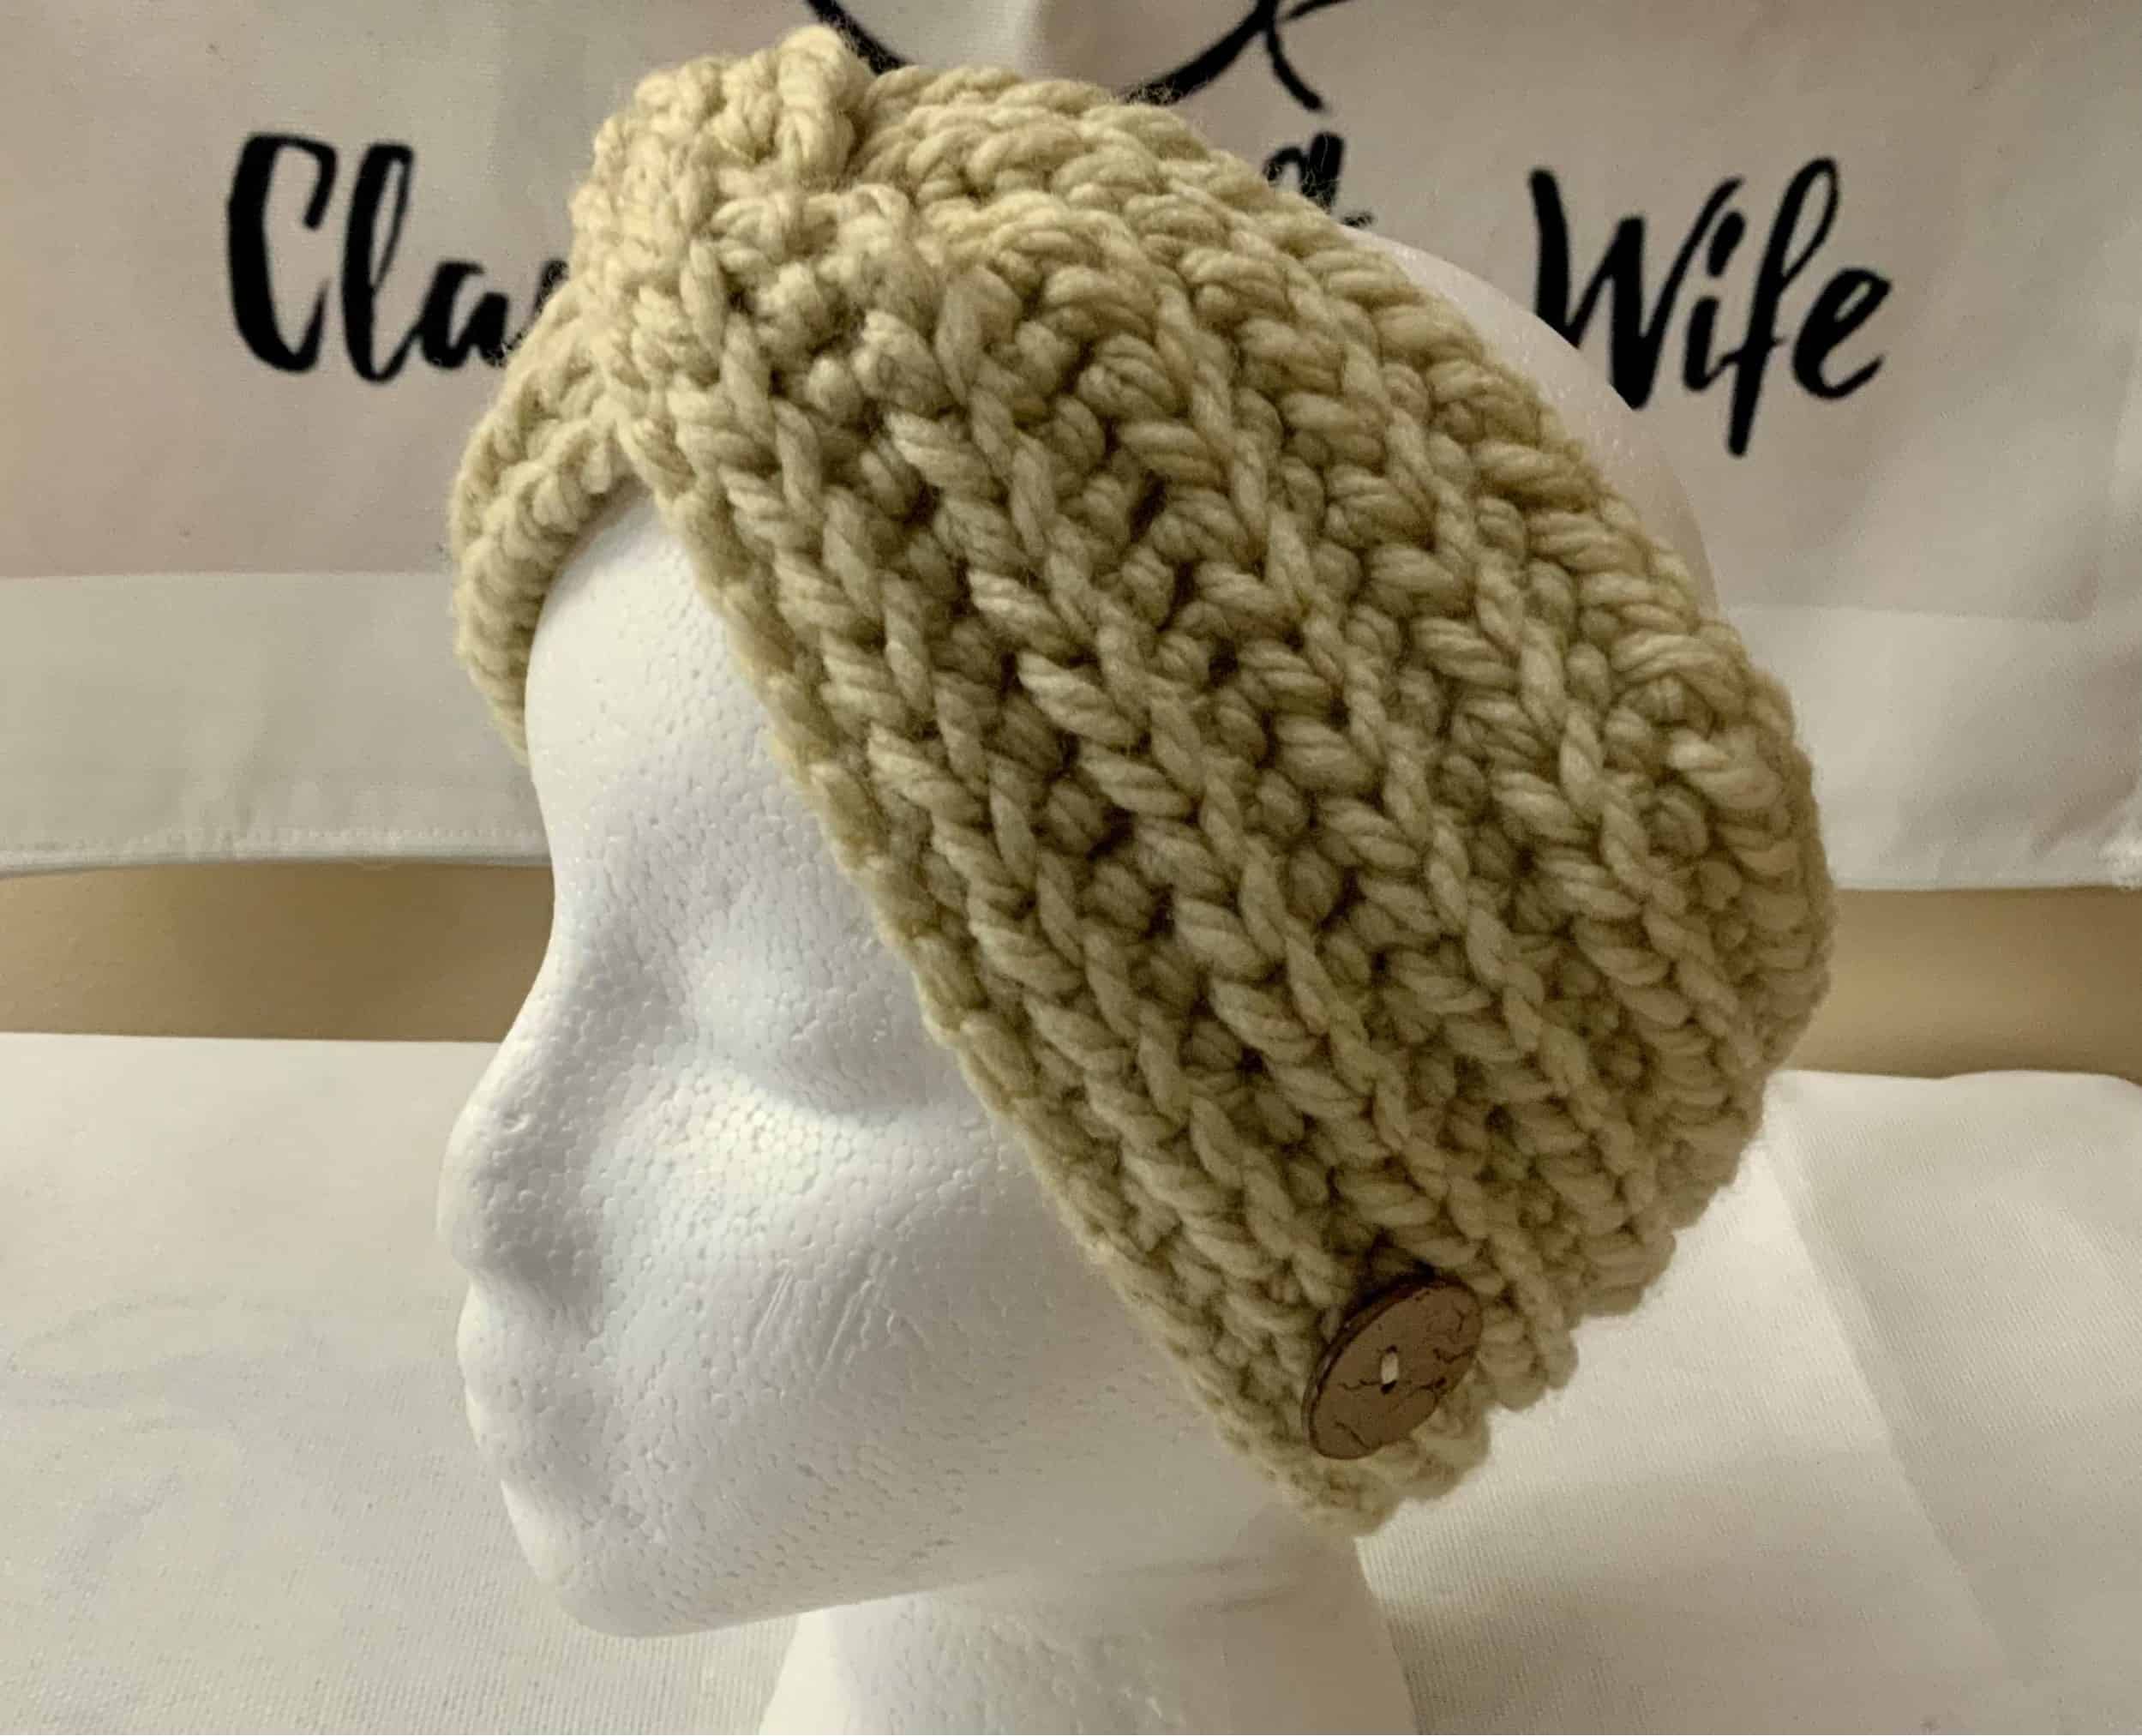 This Twisted Crochet Headband W/Buttons is made with love by Classy Crafty Wife! Shop more unique gift ideas today with Spots Initiatives, the best way to support creators.